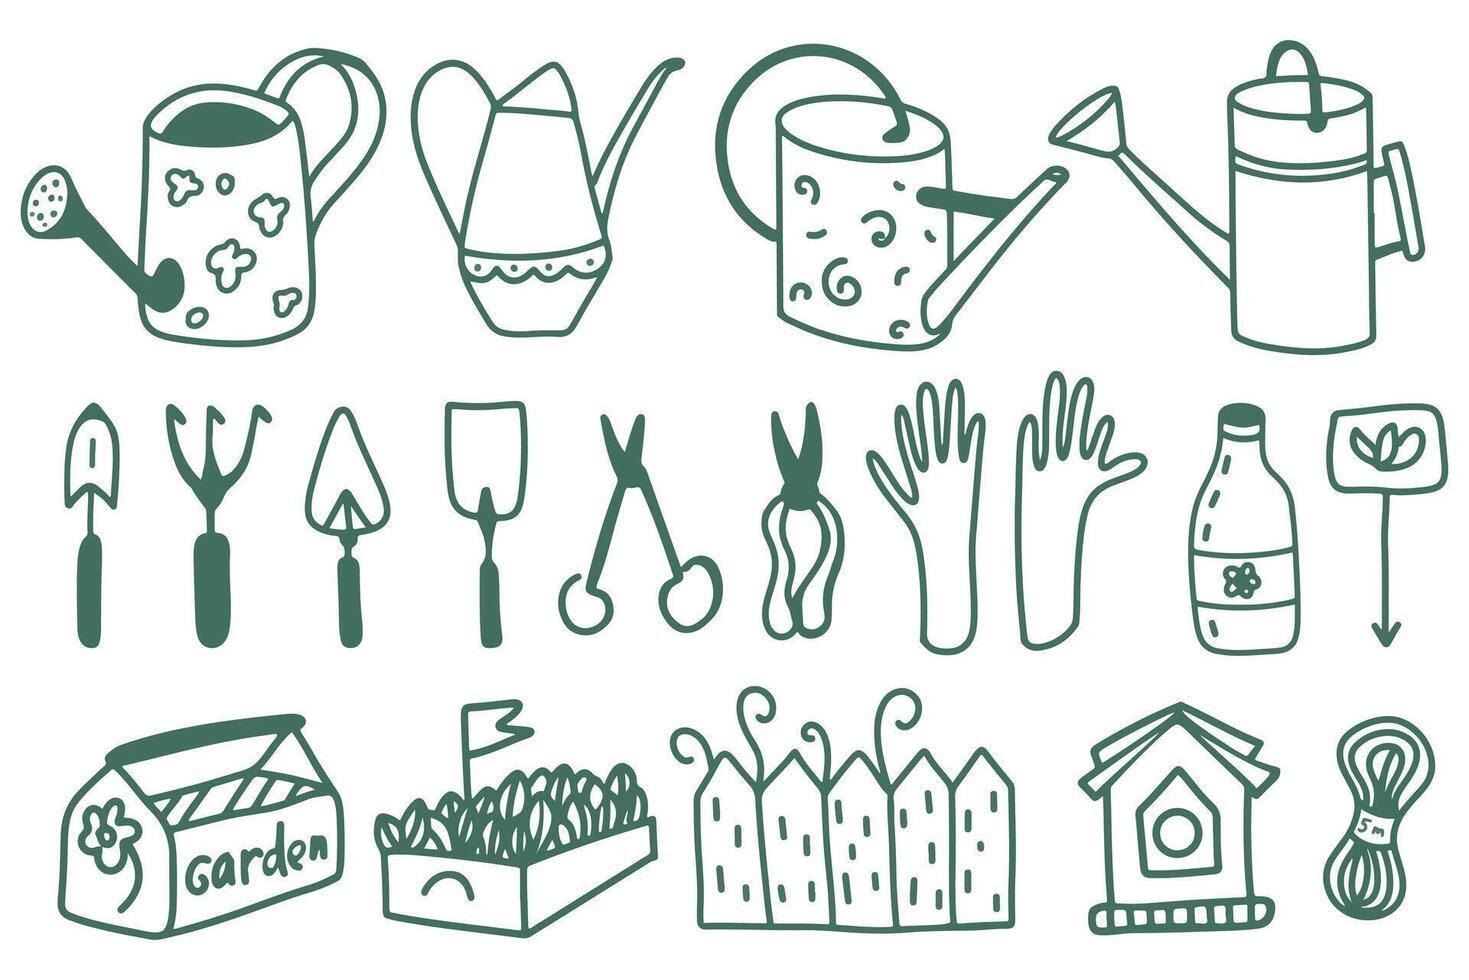 Garden set in the style of doodle and cartoon in green. Four watering cans, gardening tools and gloves, boxes for seedlings, a birdhouse. Cute set of gardener icons vector